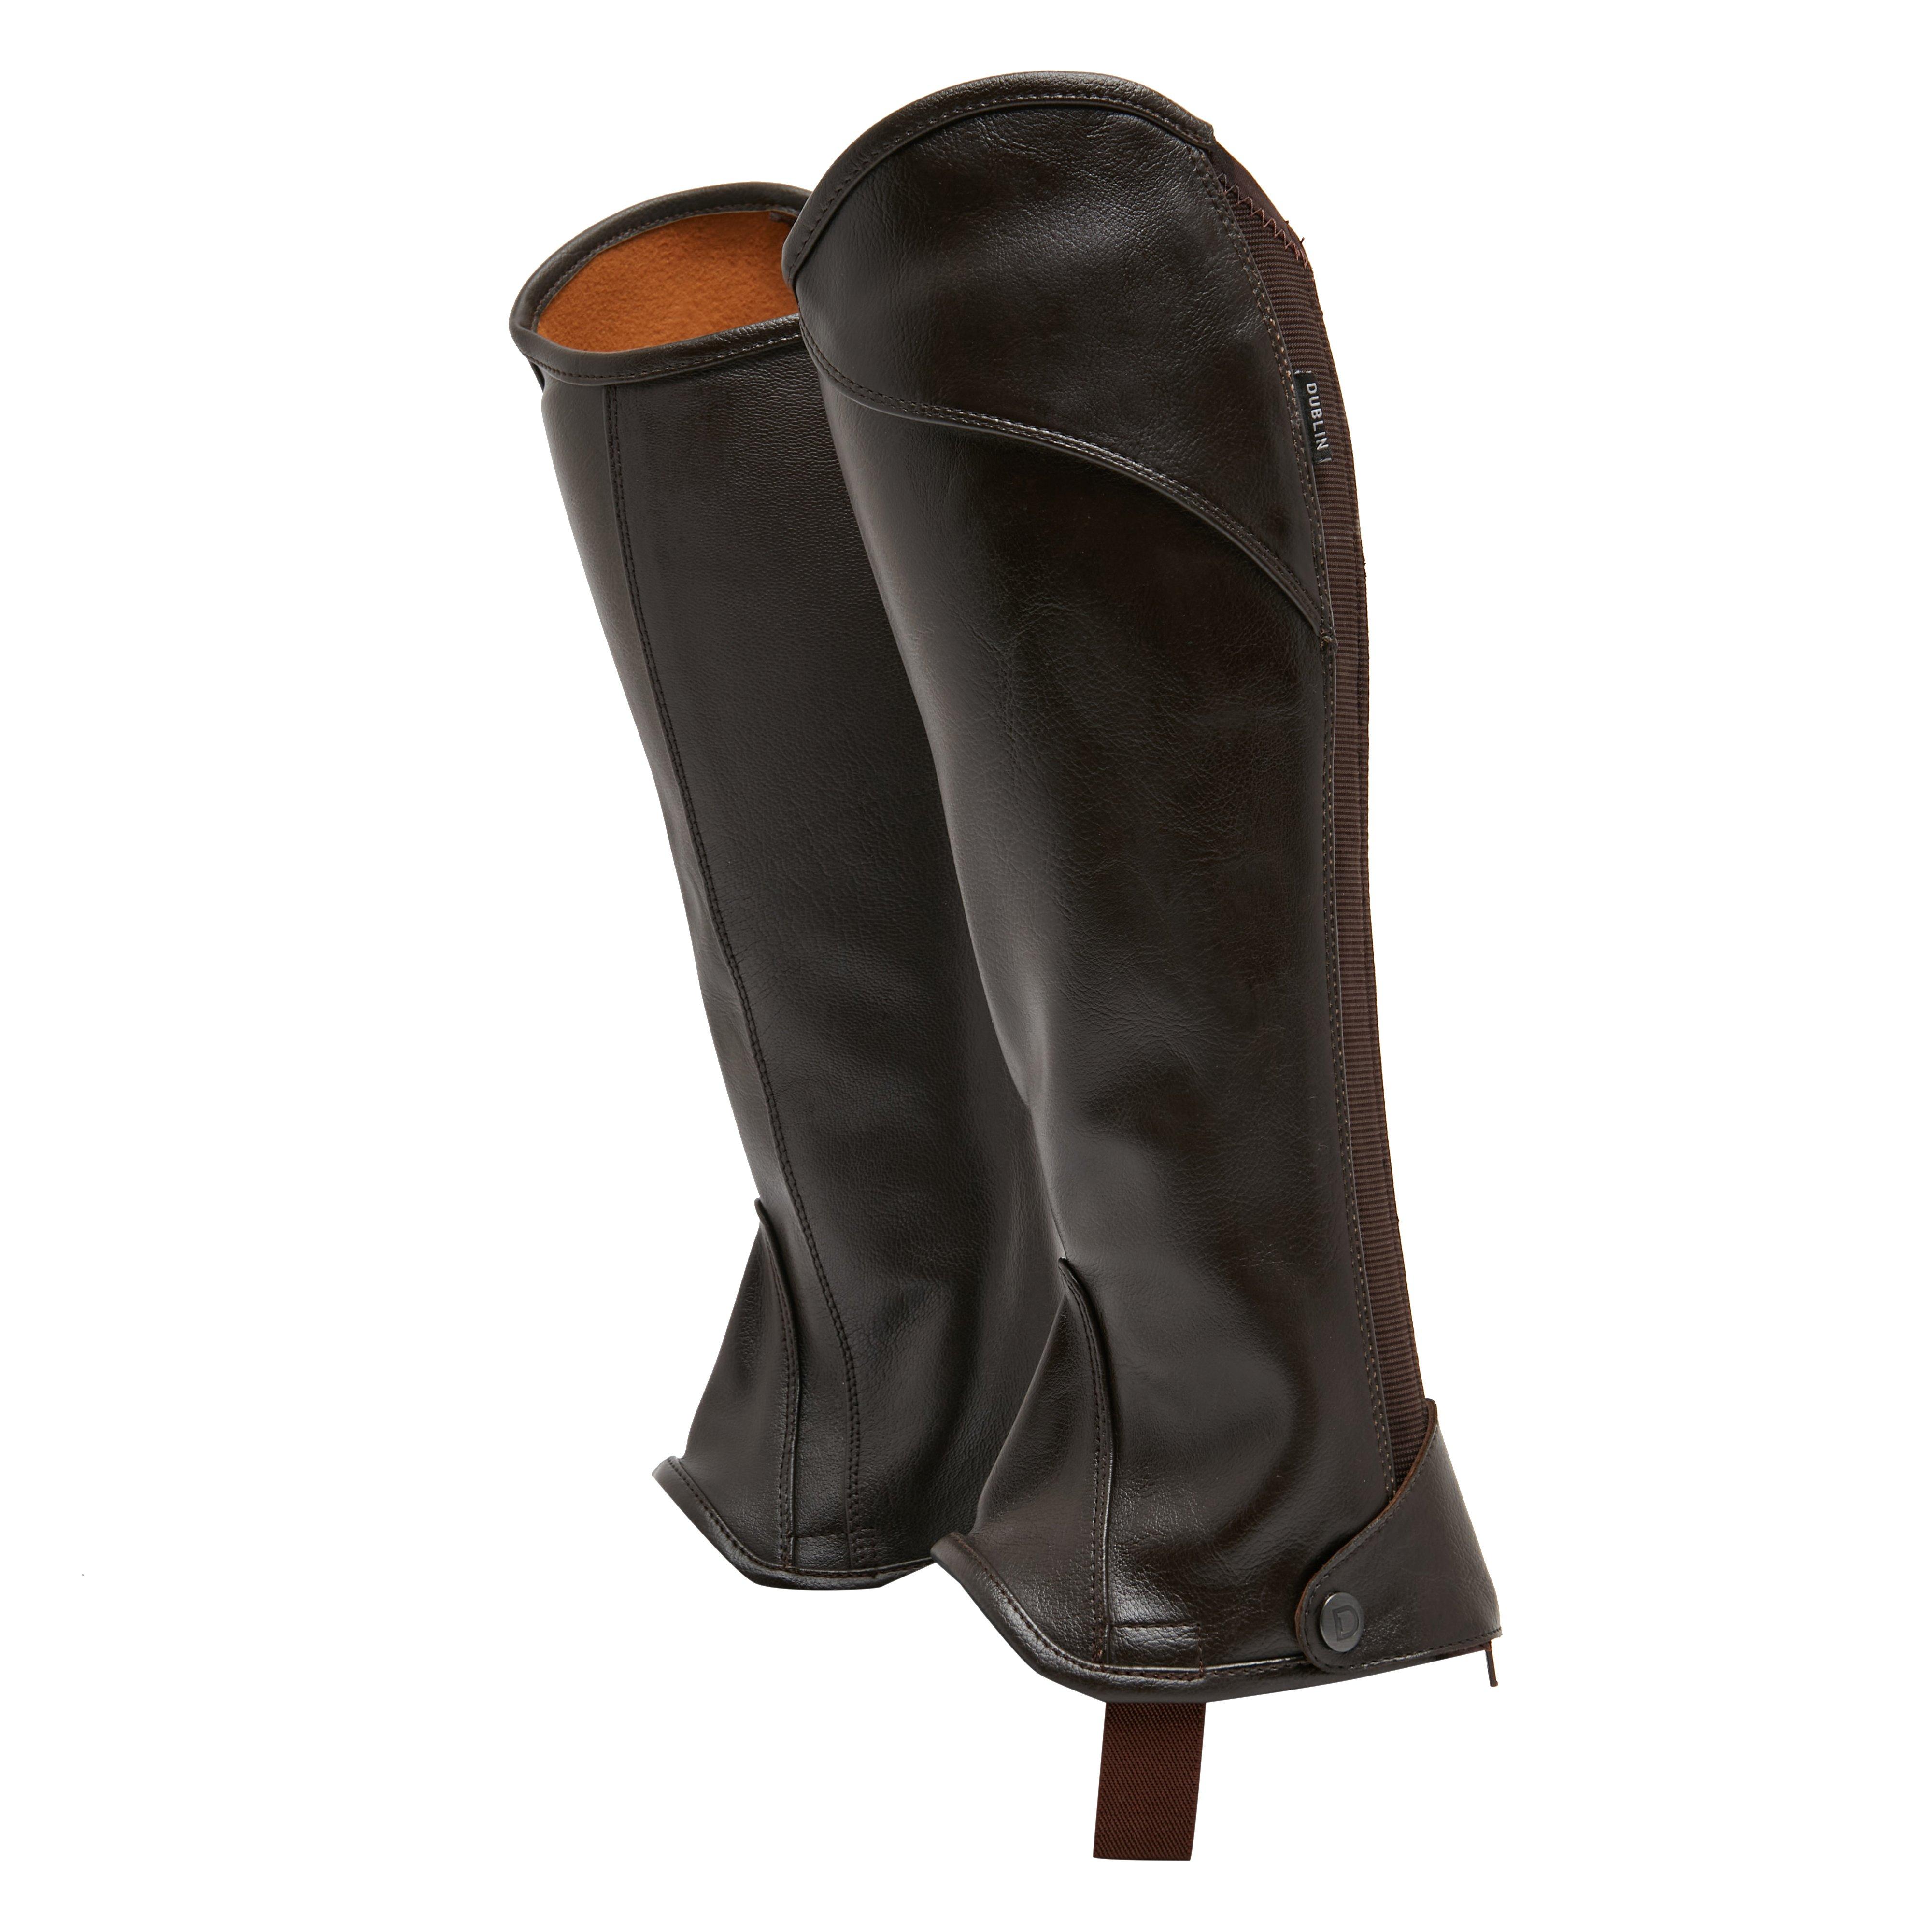 Adults Stretch Fit Half Chaps Brown